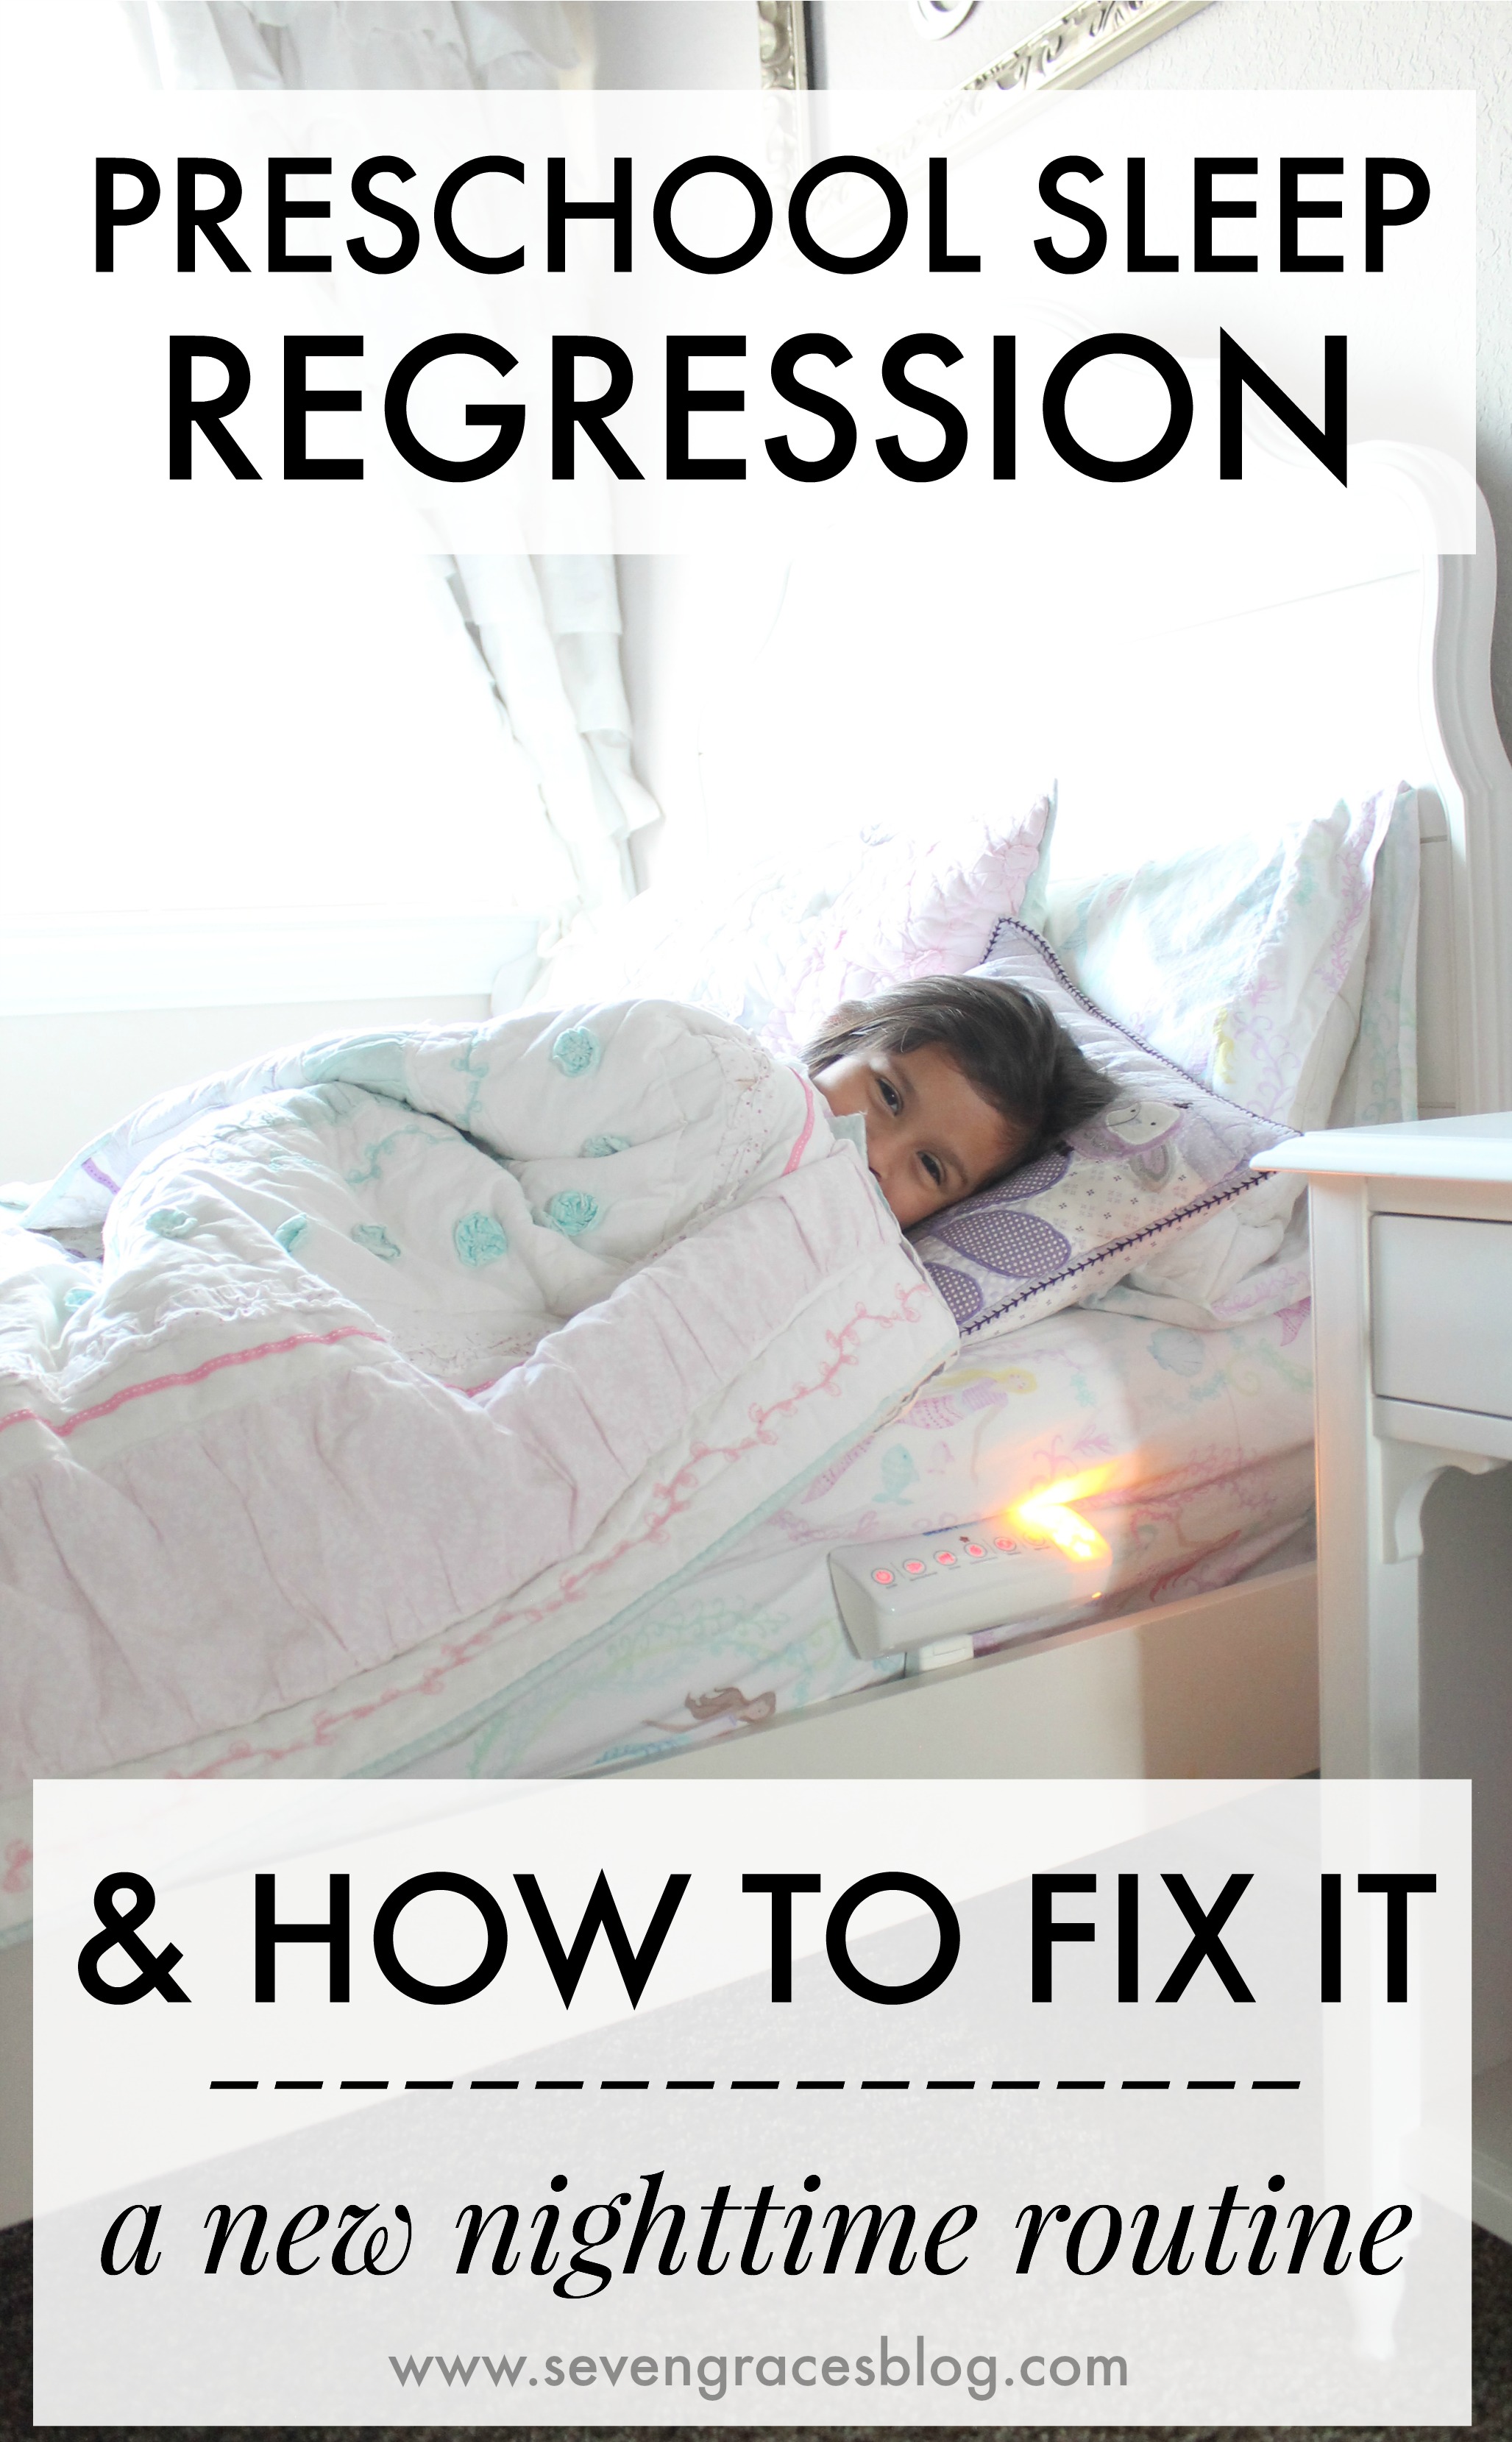 Preschool sleep regression and how to fix it (including our newfound love for the HaloSleep SnoozyPod). When your child has a newfound fear, a new nighttime routine is necessary. Is your preschooler waking up at night or fighting bedtime? Read all about our experience with sleep regression and the tips I've learned on how to fix it. #halosleep #ad